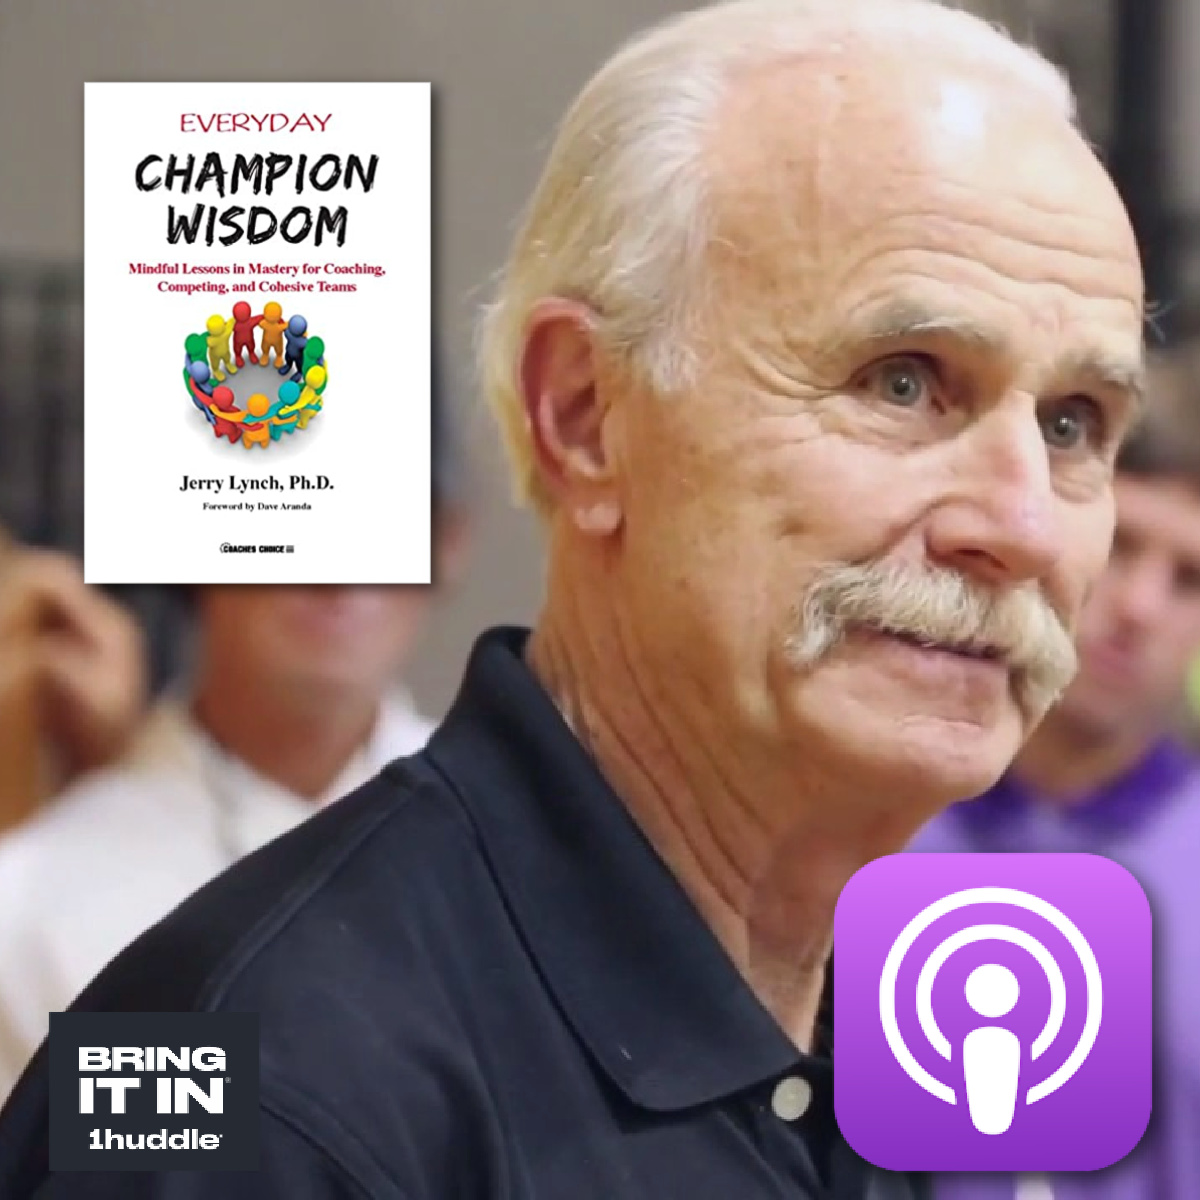 Coach, Mentor, Teacher to 115+ Championship Teams, and Author of “Everyday Champion Wisdom”